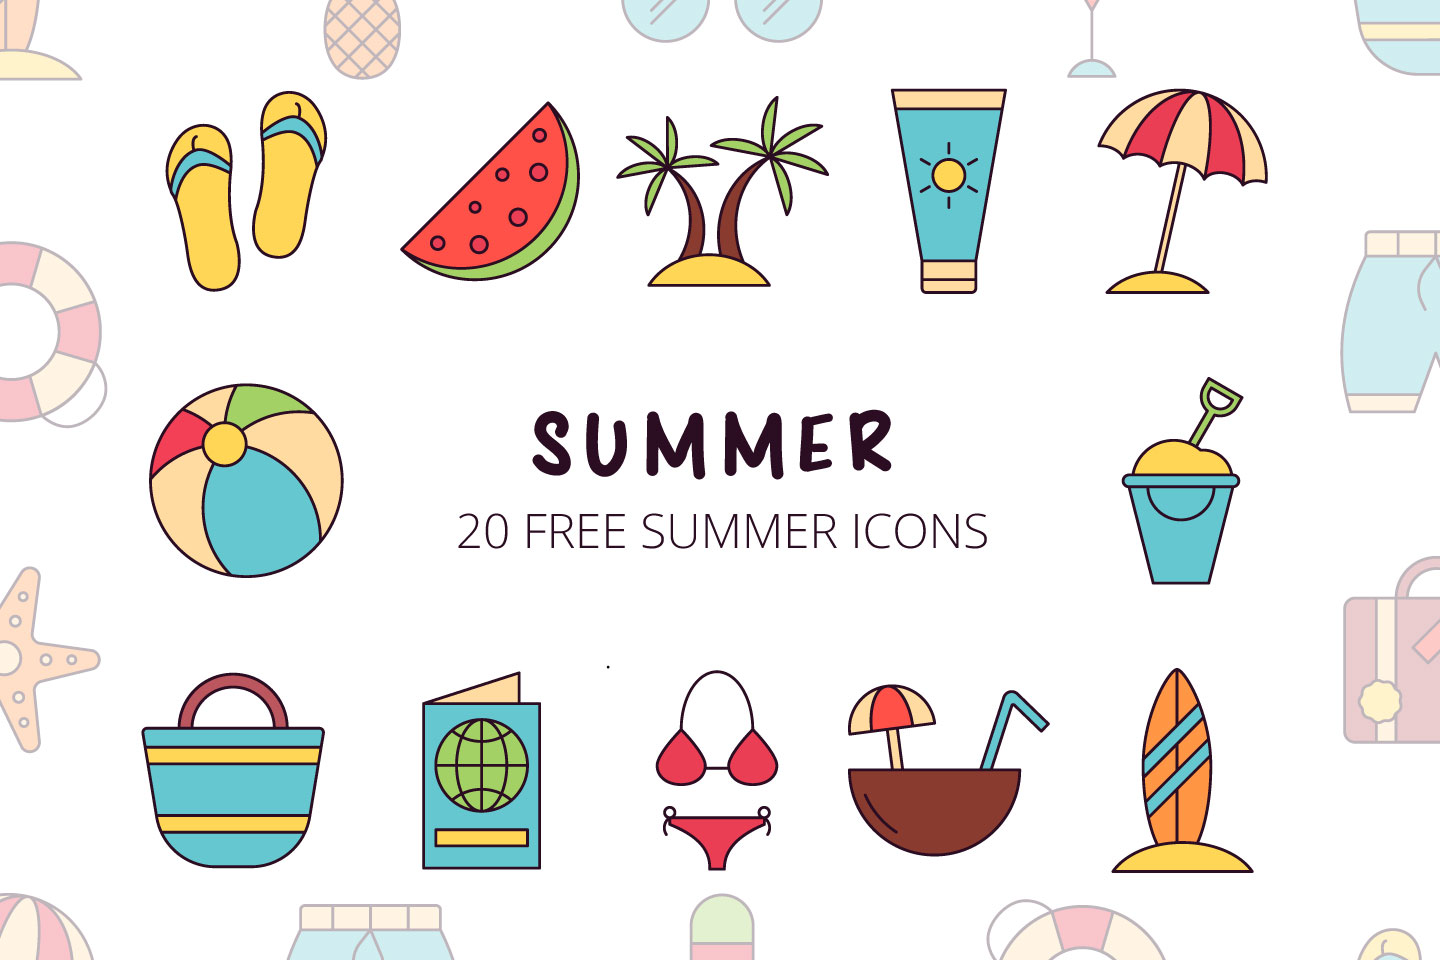 Download Summer Vector Free Icon Set - GraphicSurf.com